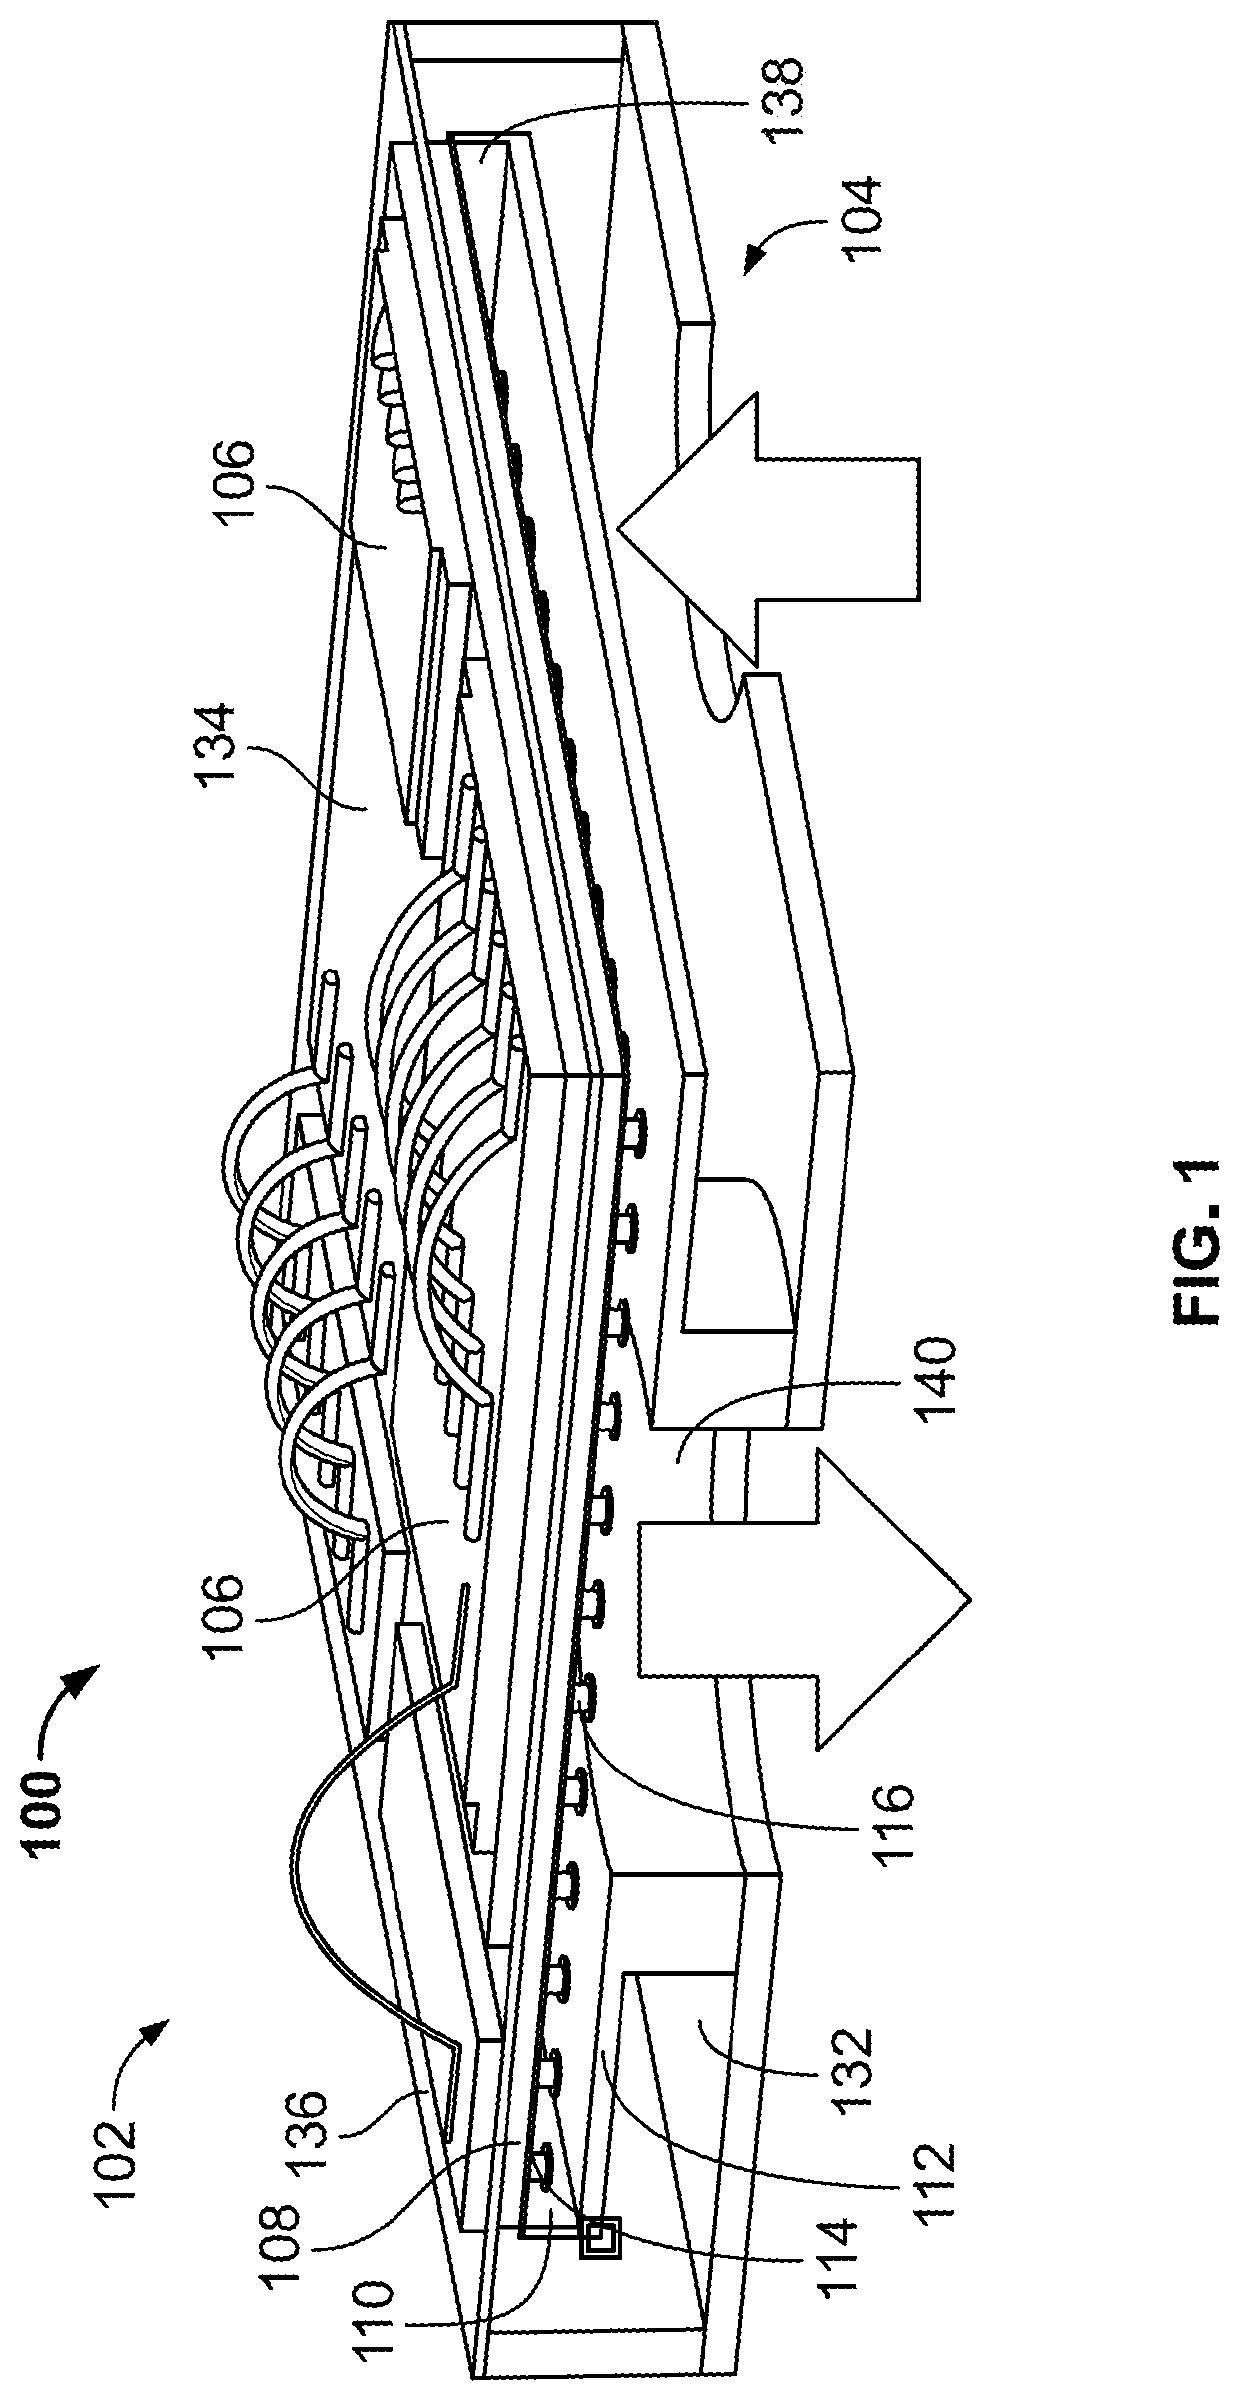 Methods and systems for evaporation of liquid from droplet confined on hollow pillar